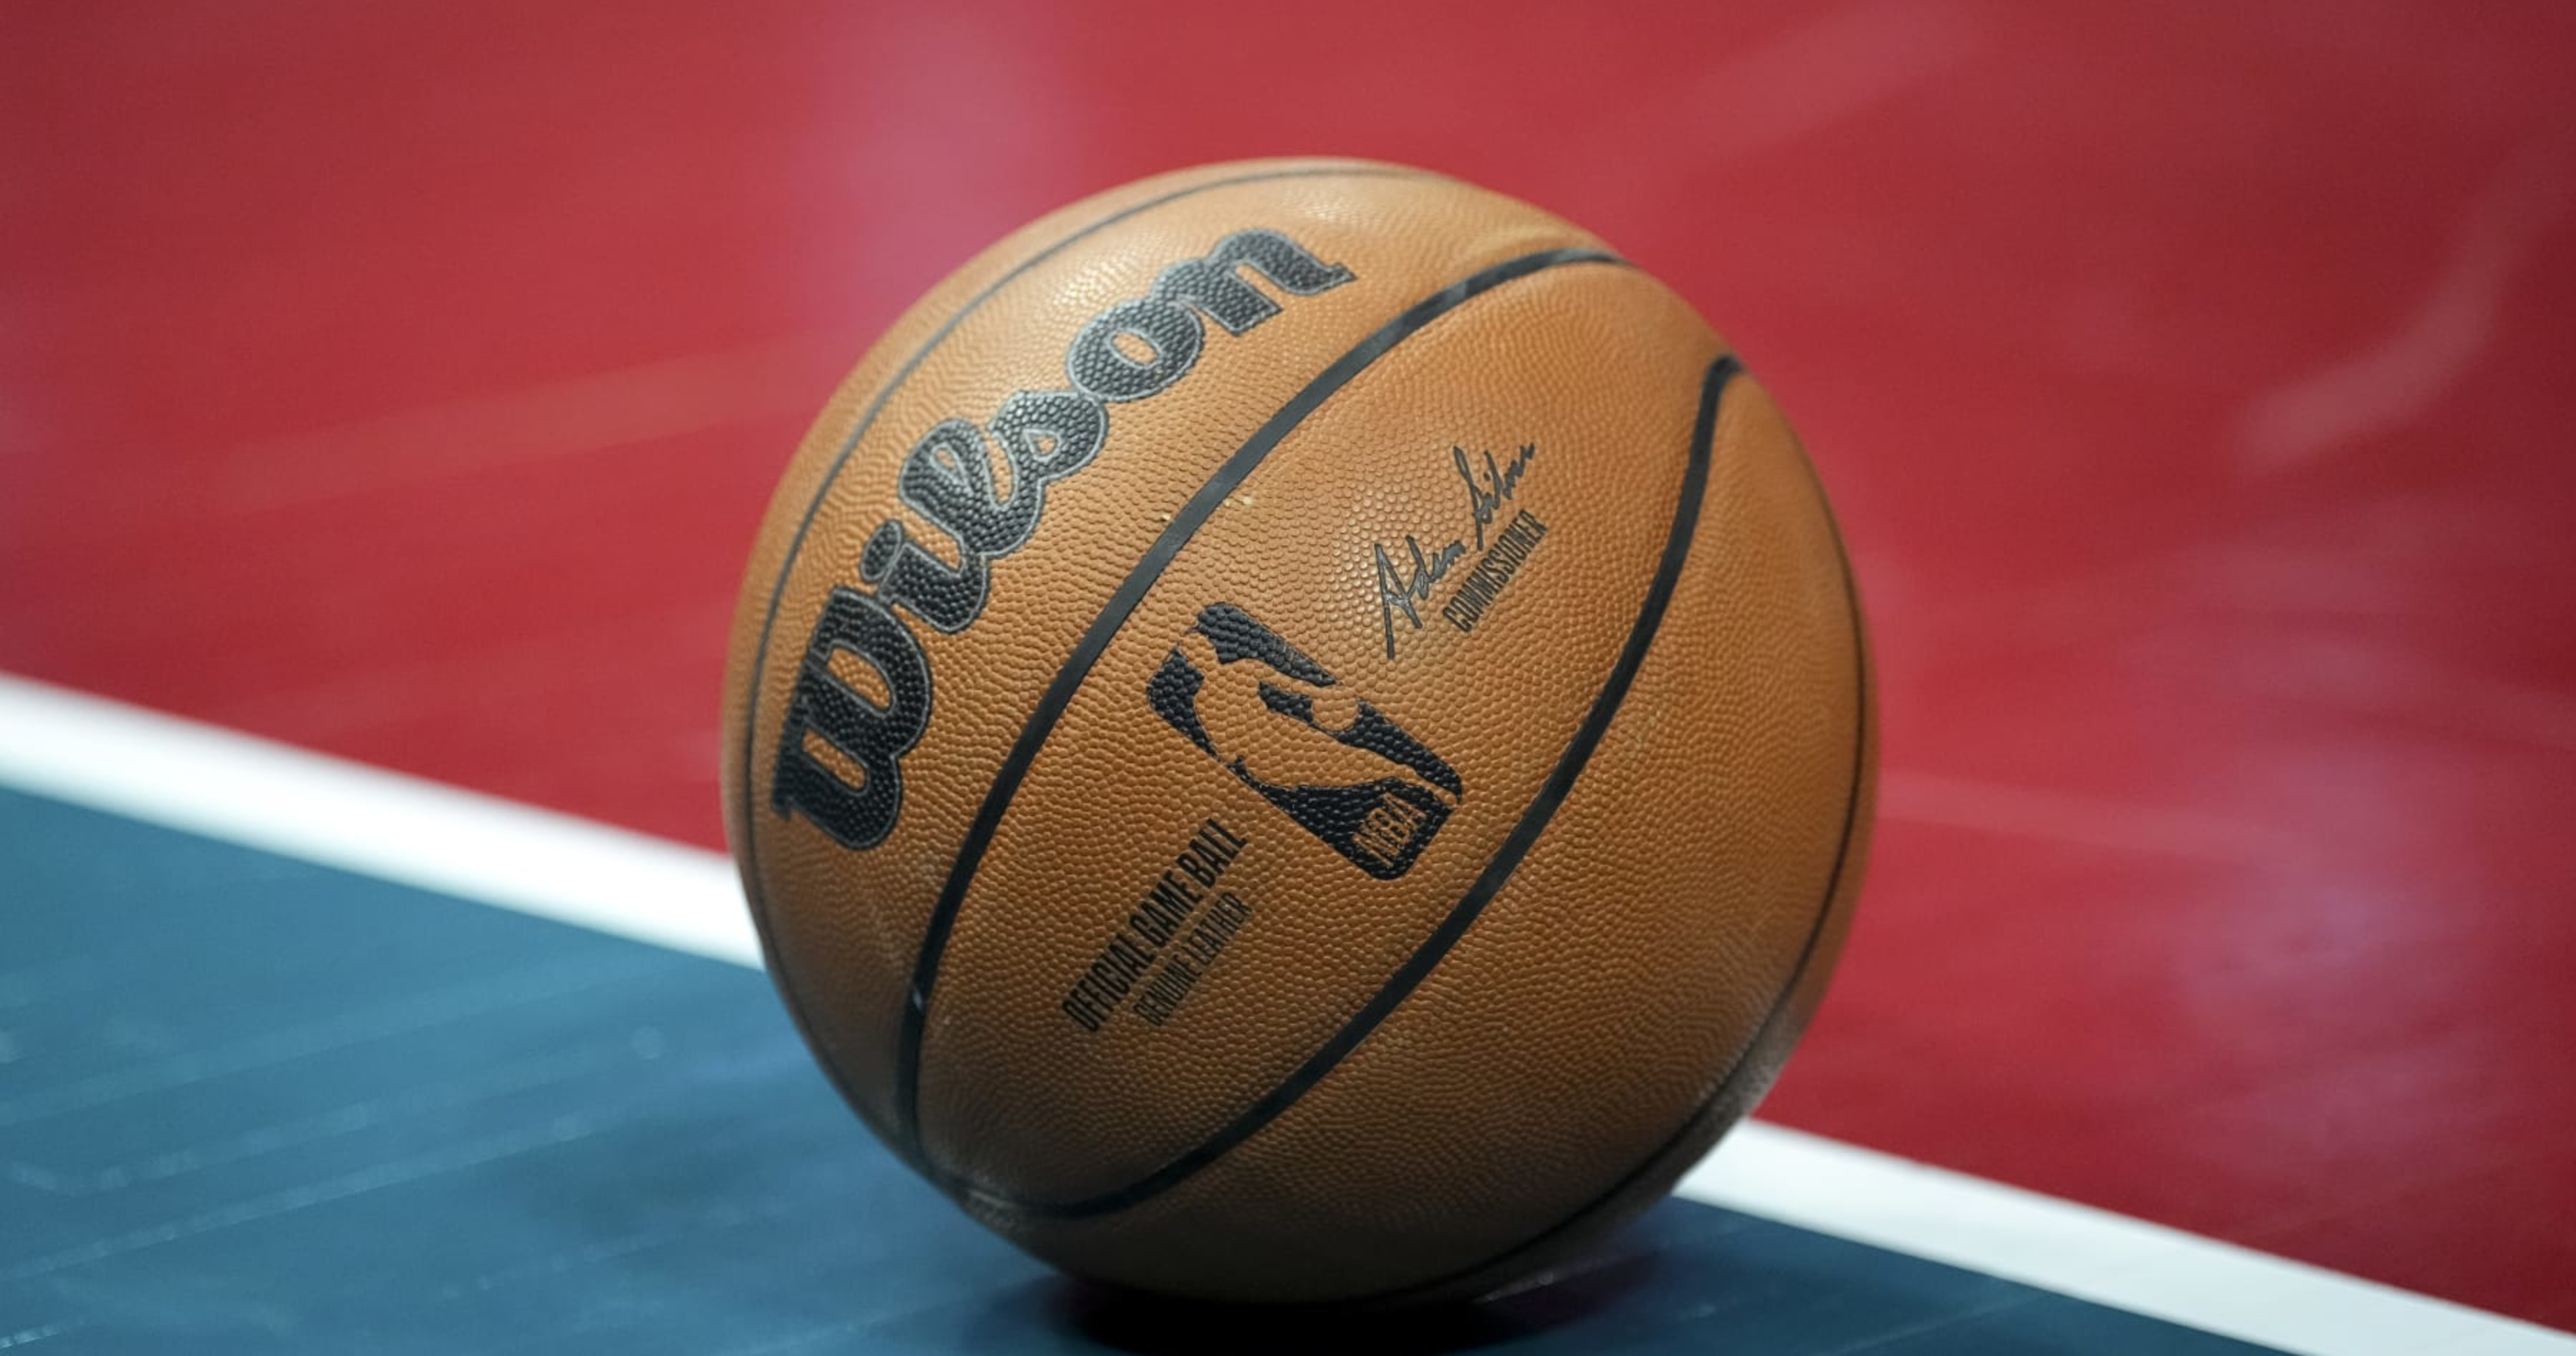 NBA's CBA Contains New Investment Opportunities For Players